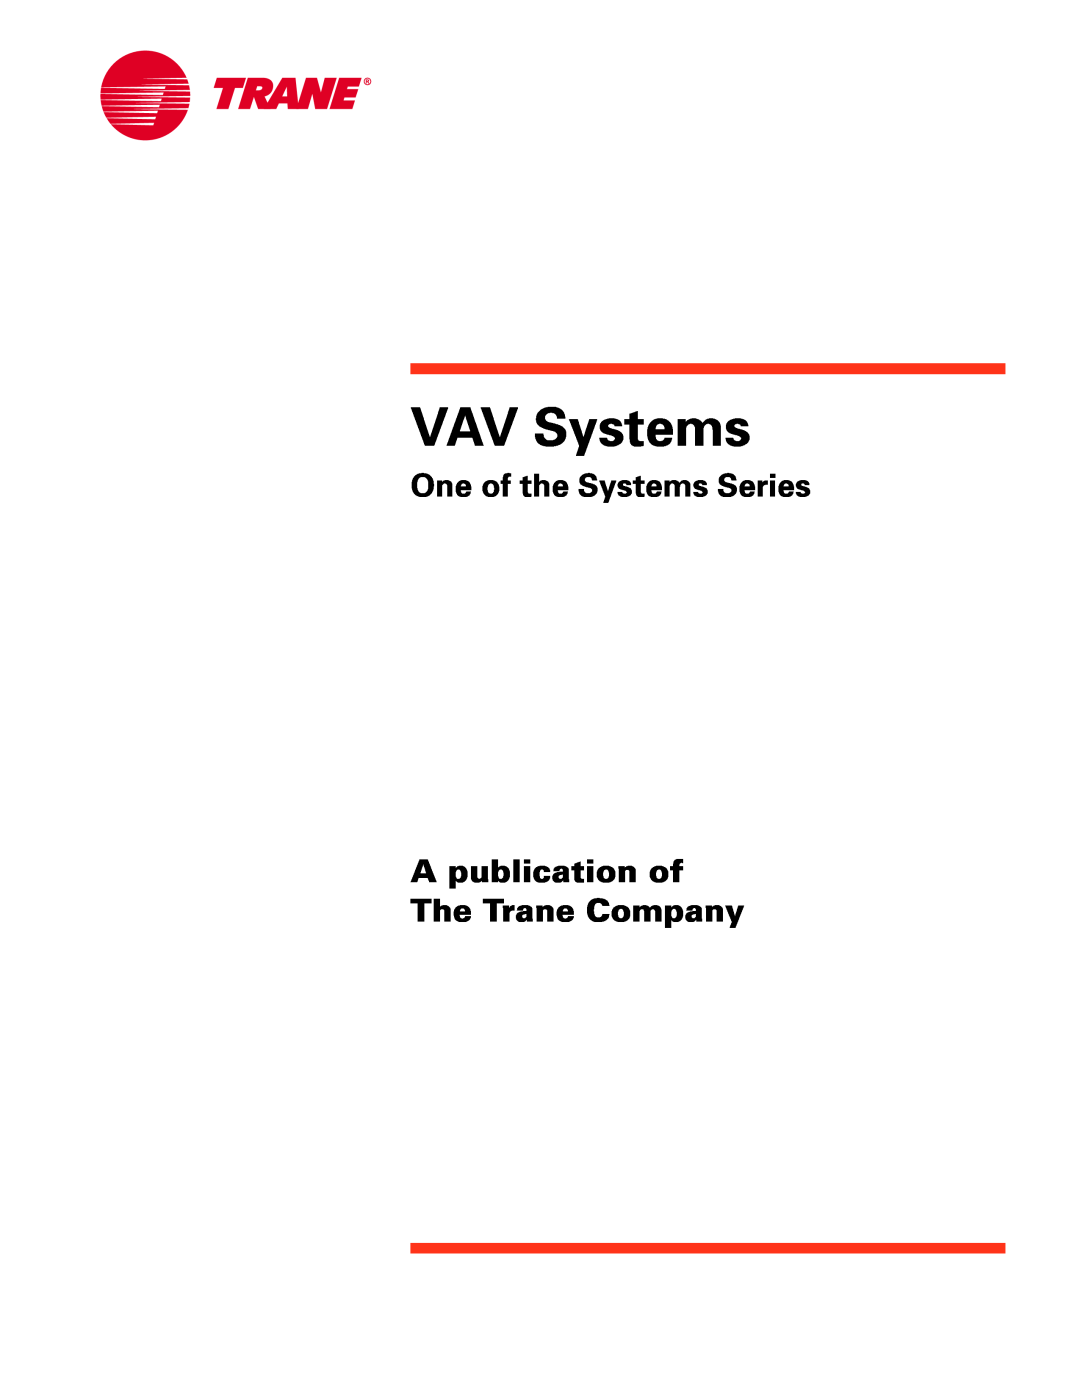 Trane TRG-TRC014-EN manual VAV Systems, A publication of The Trane Company, One of the Systems Series 